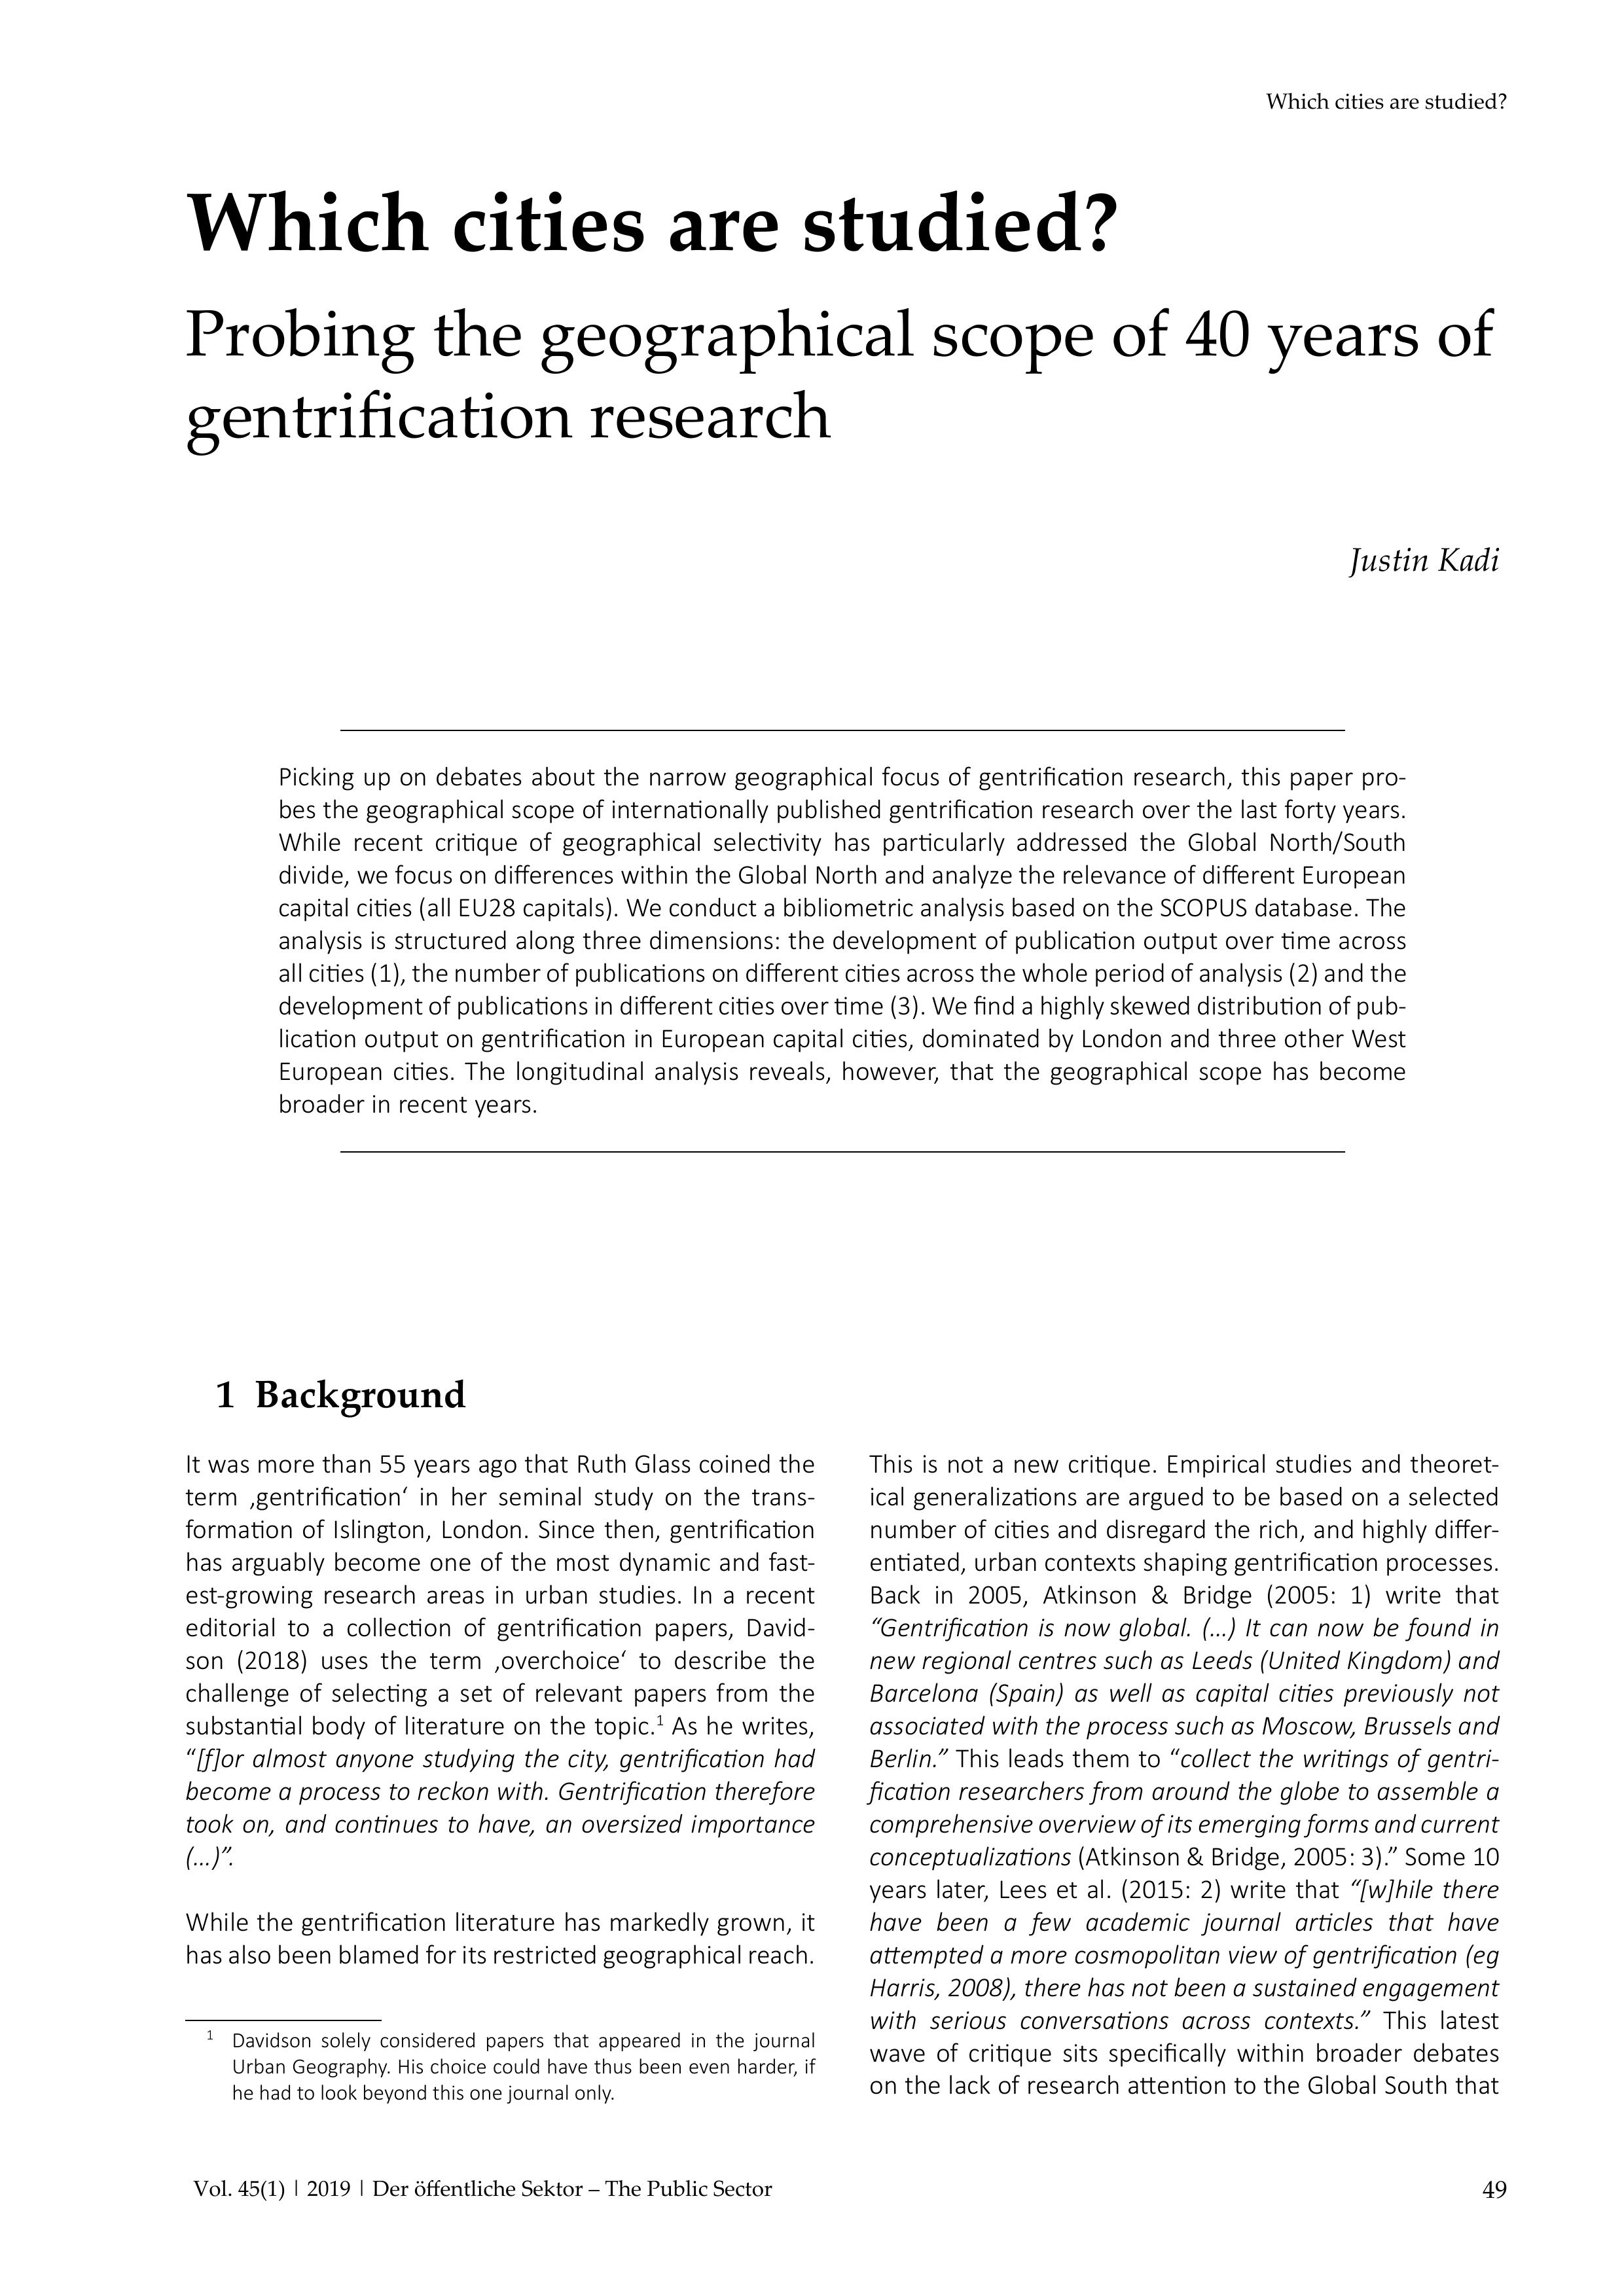 Which cities are studied? Probing the geographical scope of 40 years of gentrification research